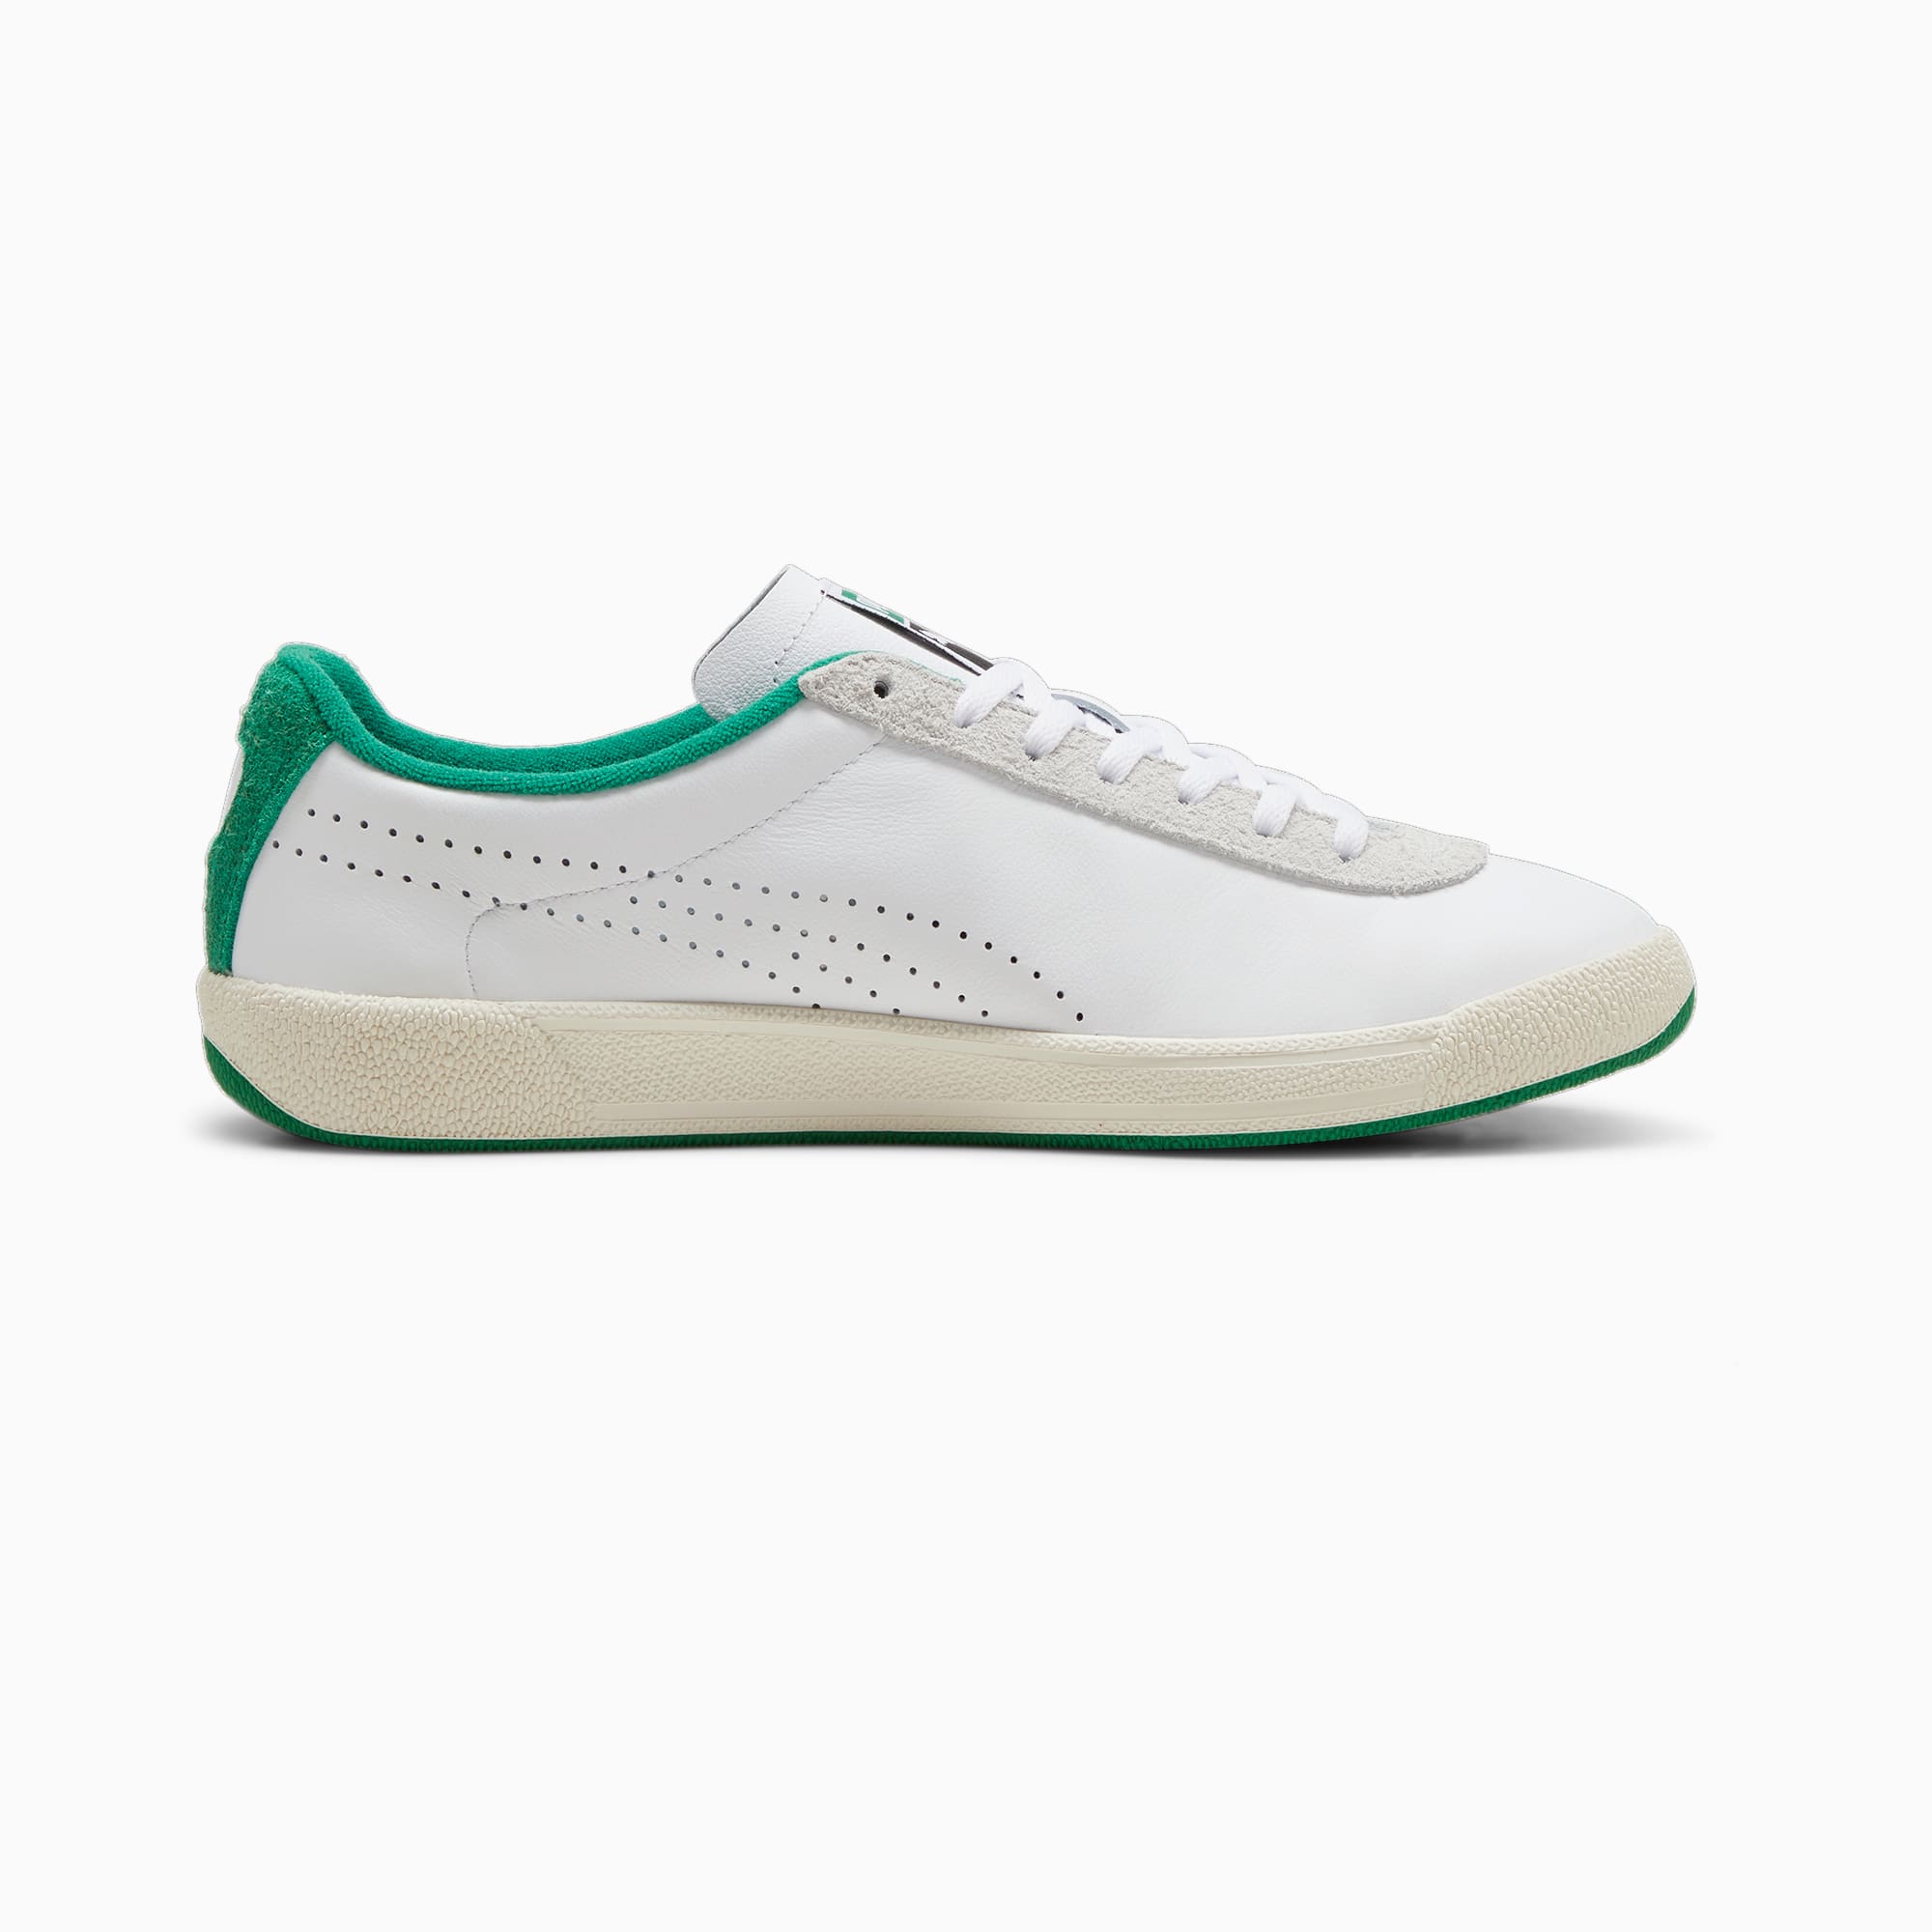 Women's PUMA Star OG Sneakers, White/Archive Green, Size 35,5, Shoes